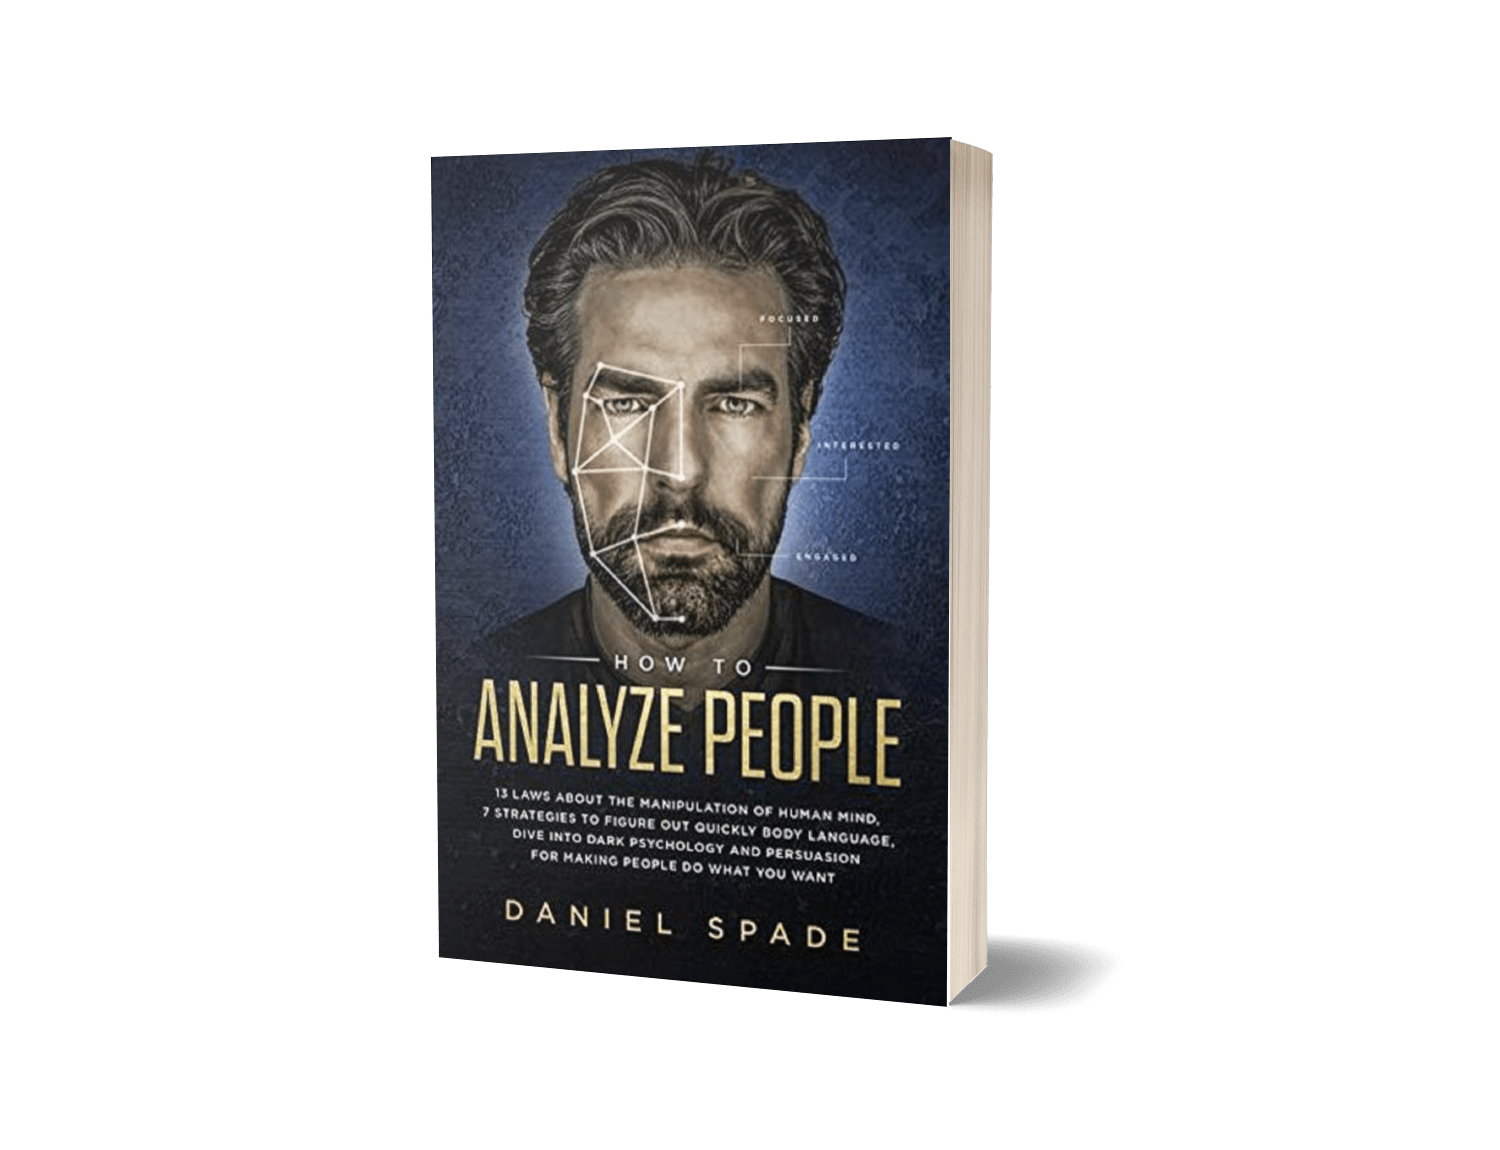 How to Analyze People: 13 Laws About the Manipulation of the Human Mind, 7 Strategies to Quickly Figure Out Body Language, Dive into Dark Psychology and Persuasion for Making People Do What You Want By: Daniel Spade